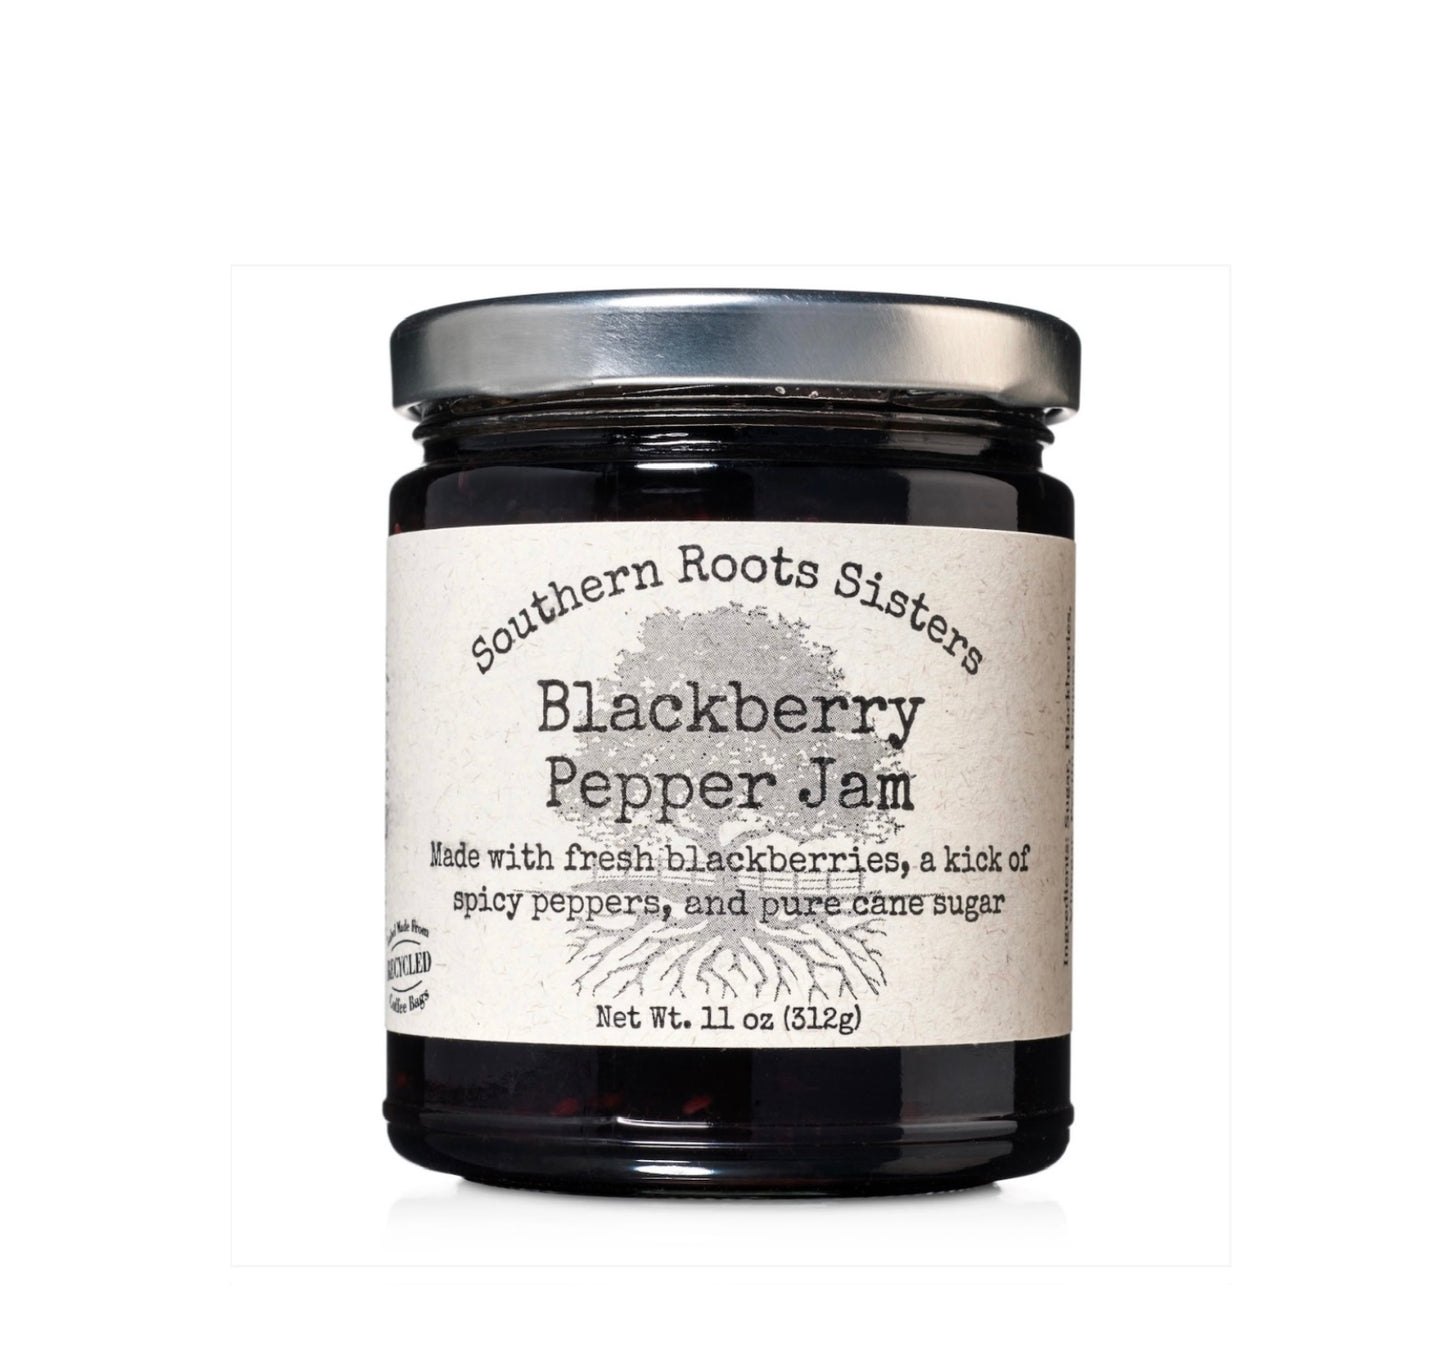 Pepper Jam Blackberry by Southern Roots